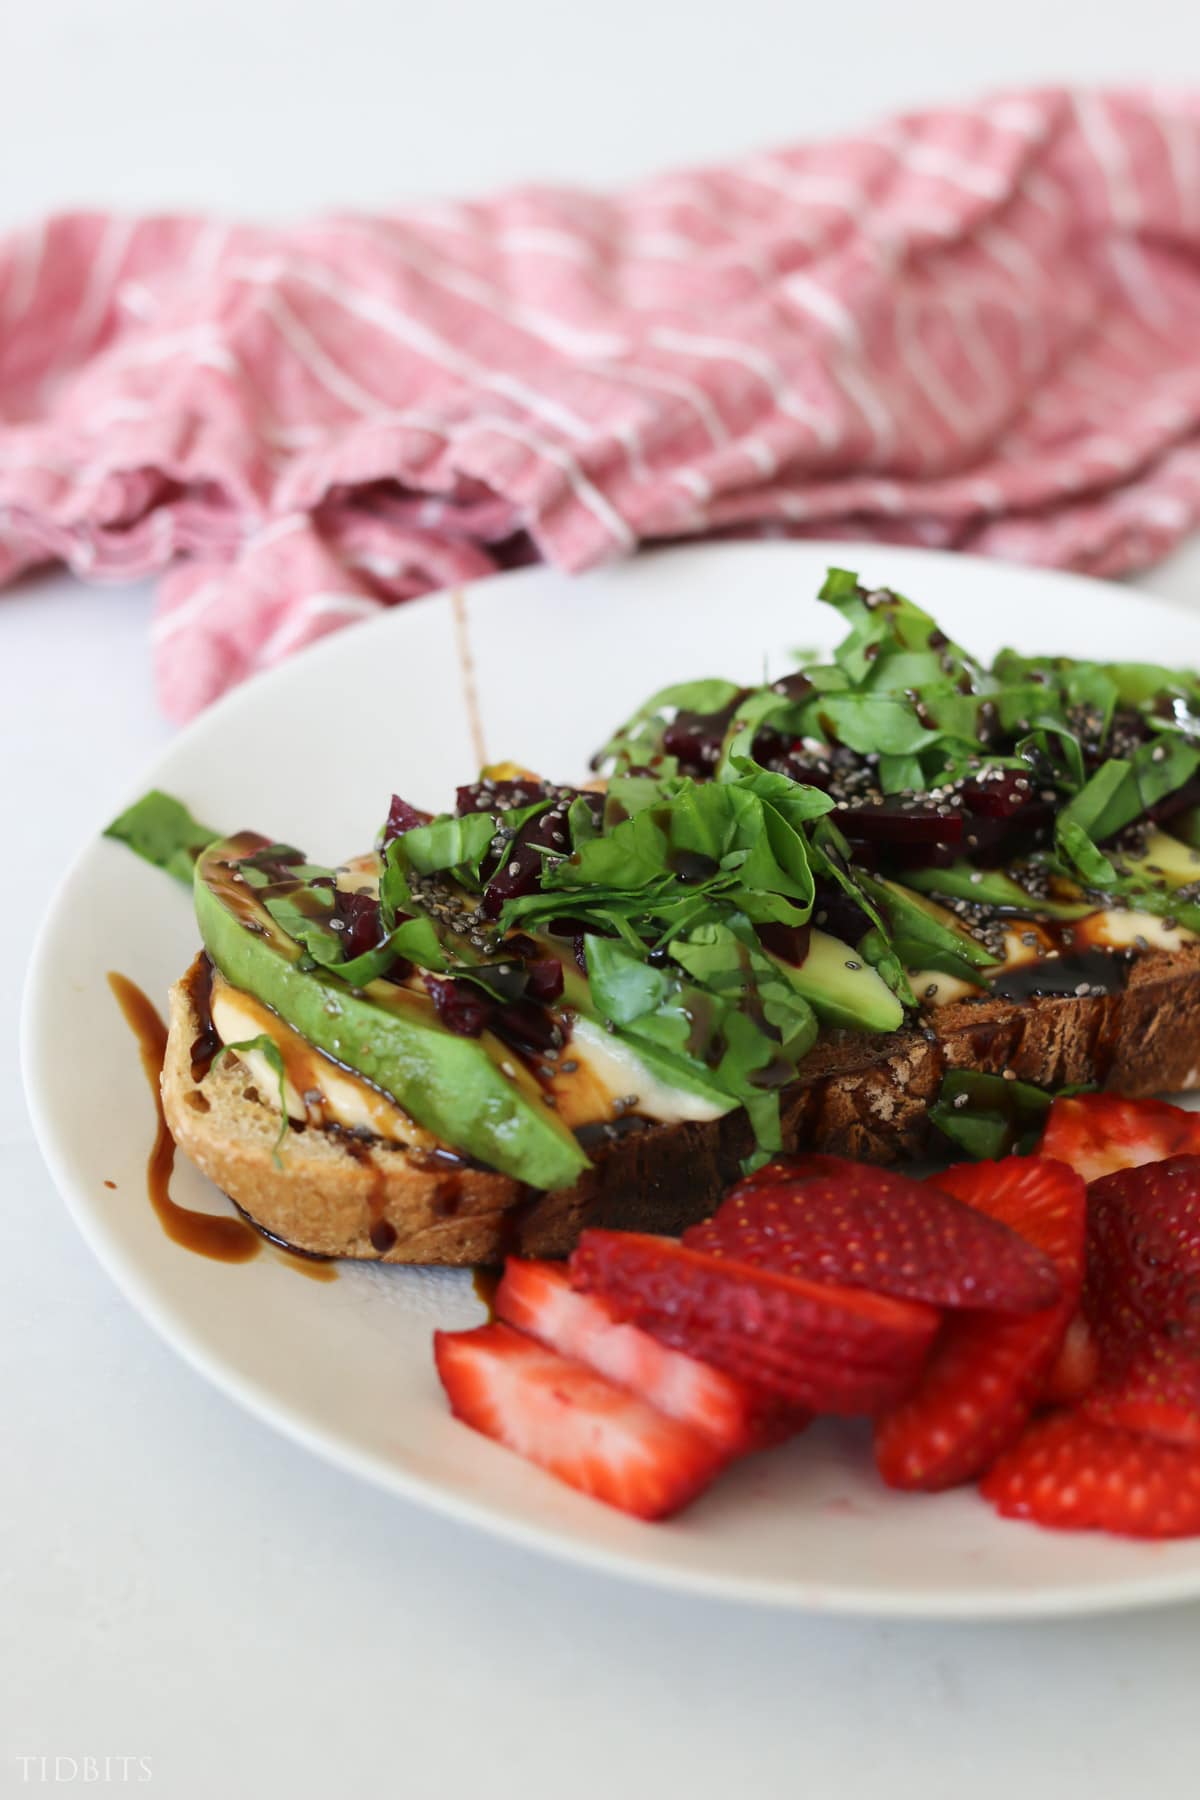 Strawberries and fancy toast topped with vegetables and dressing for dinner